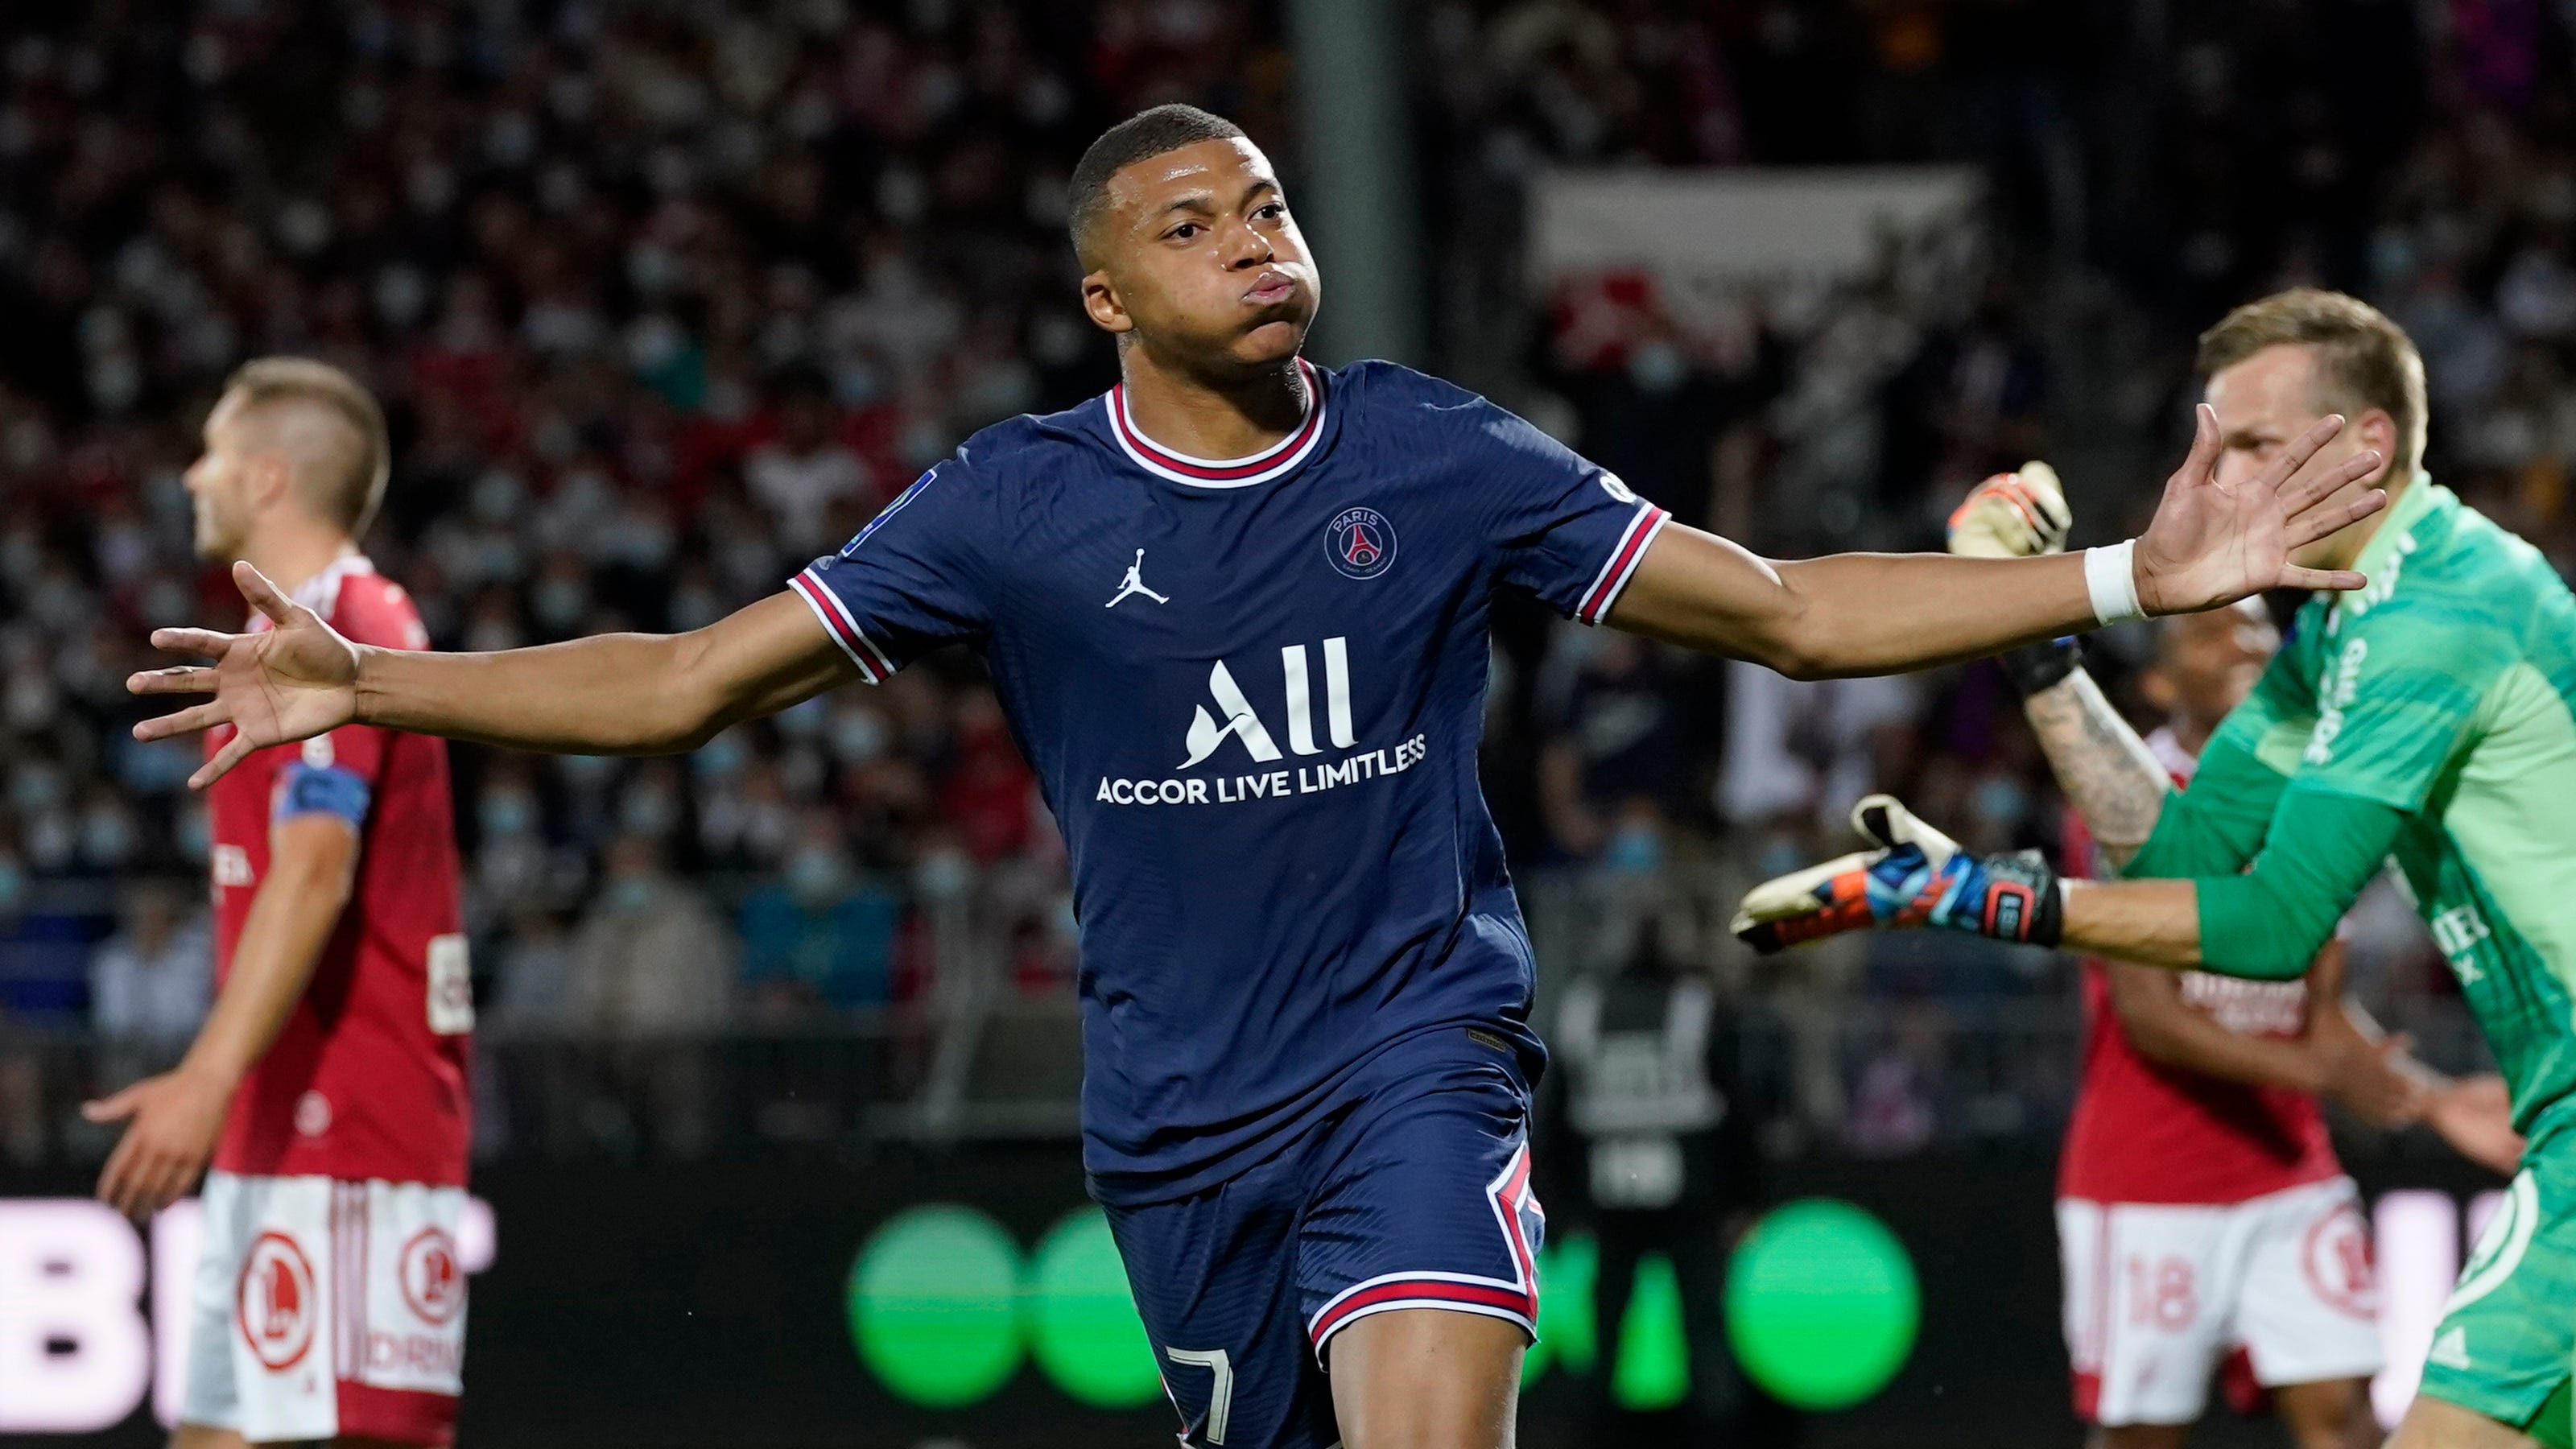 PSG rejects Madrid offer for Mbappé but is open to negotiate